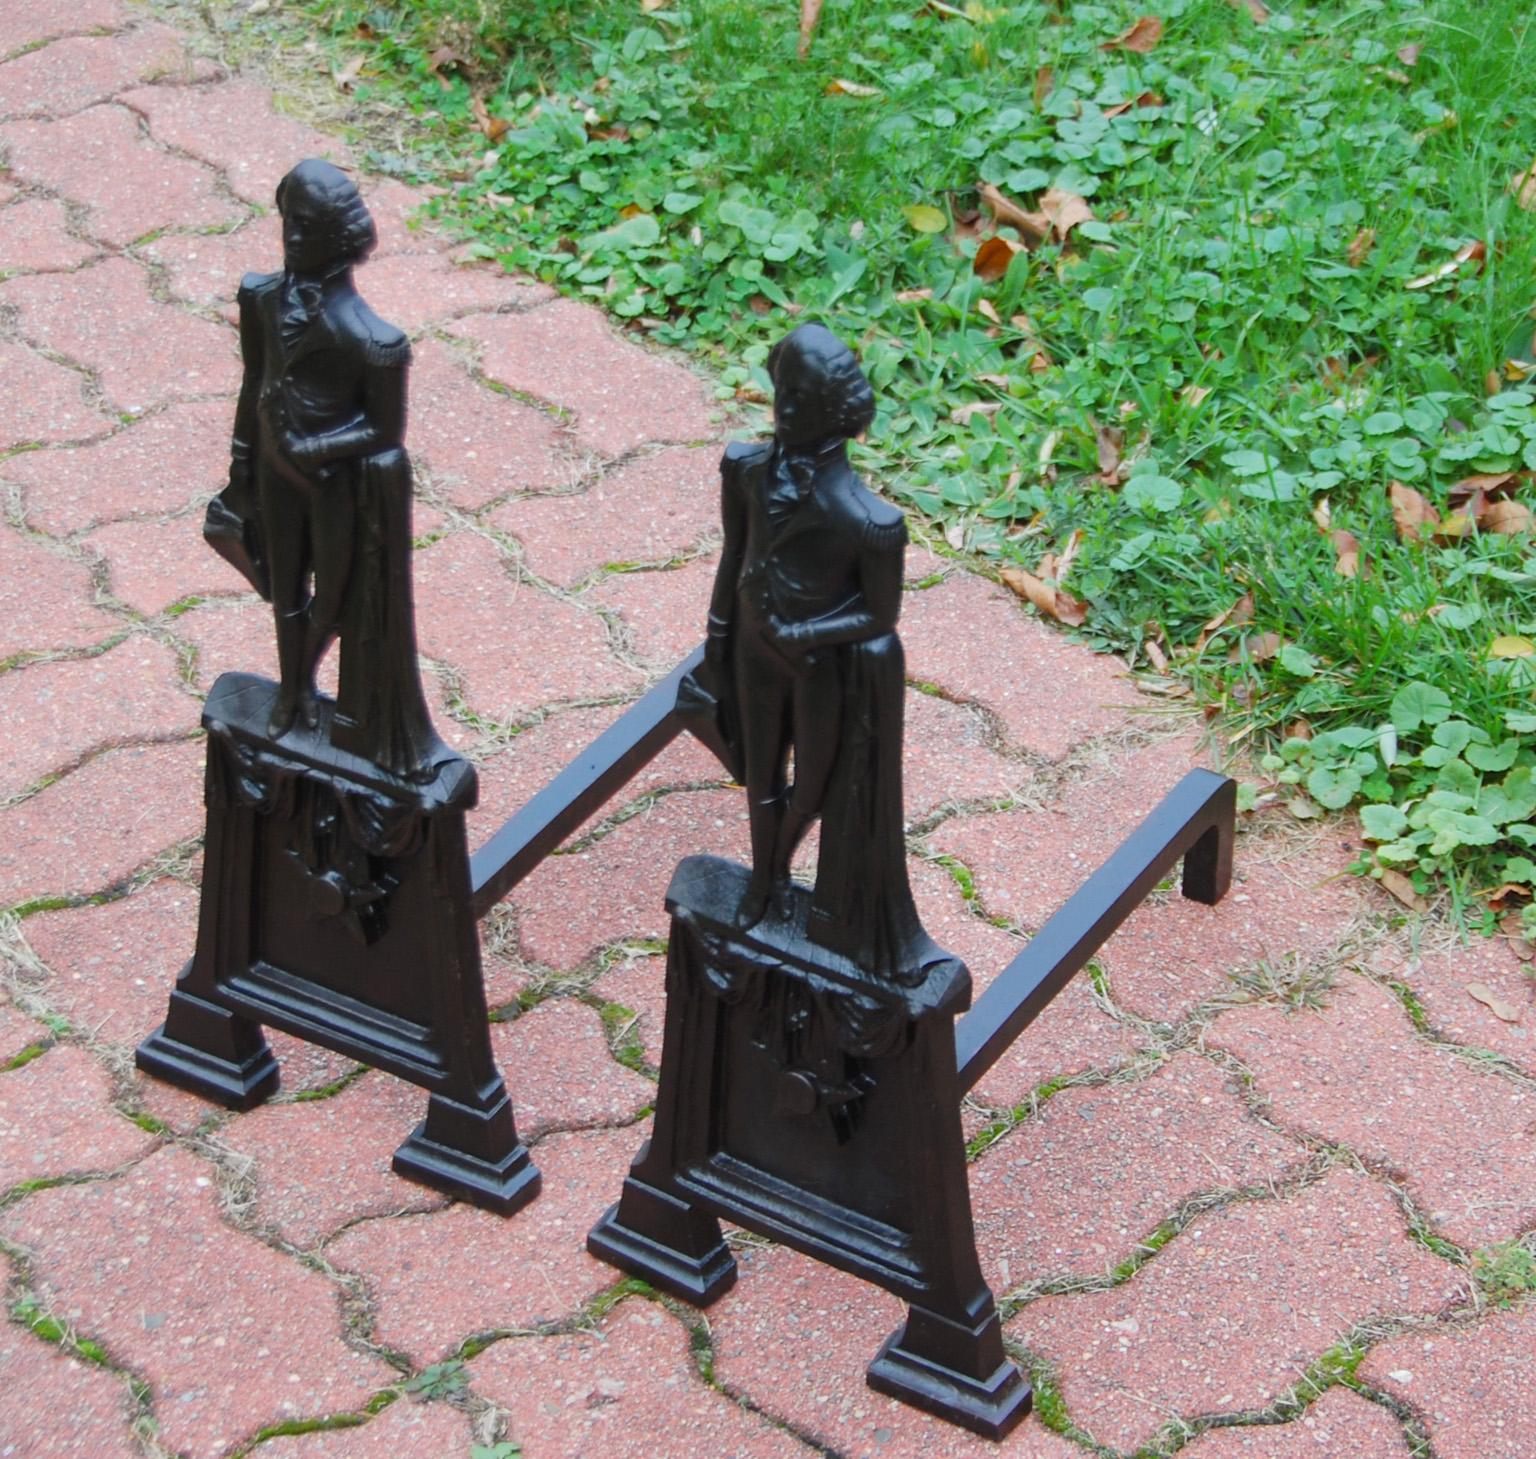 American cast iron George Washington andirons of the mid 19th century. These large scale andirons depict George Washington relaxing in his military dress uniform, leaning against a draped pillar, casually holding his hat in his right hand. He is